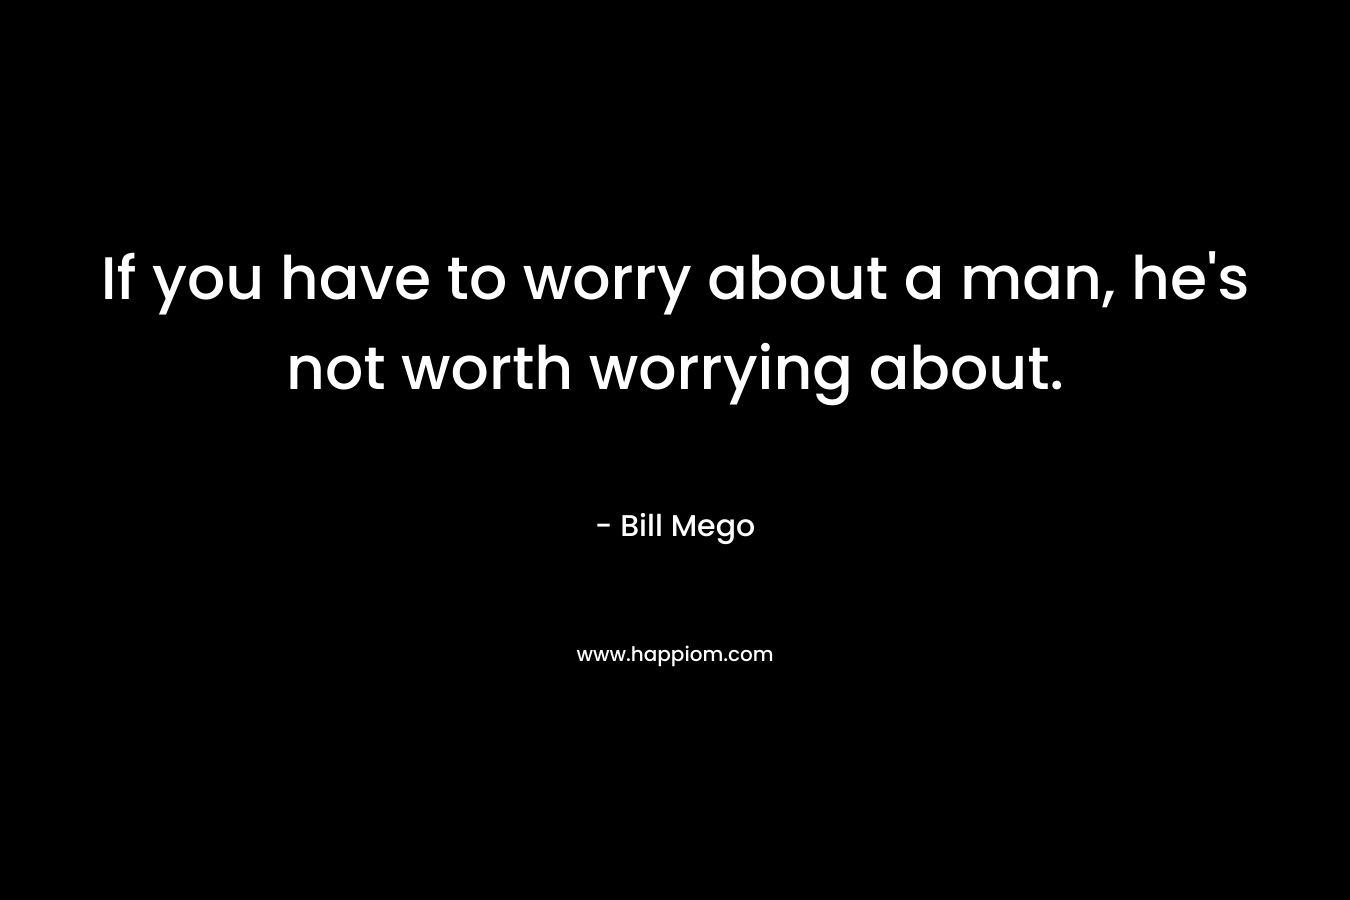 If you have to worry about a man, he’s not worth worrying about. – Bill Mego